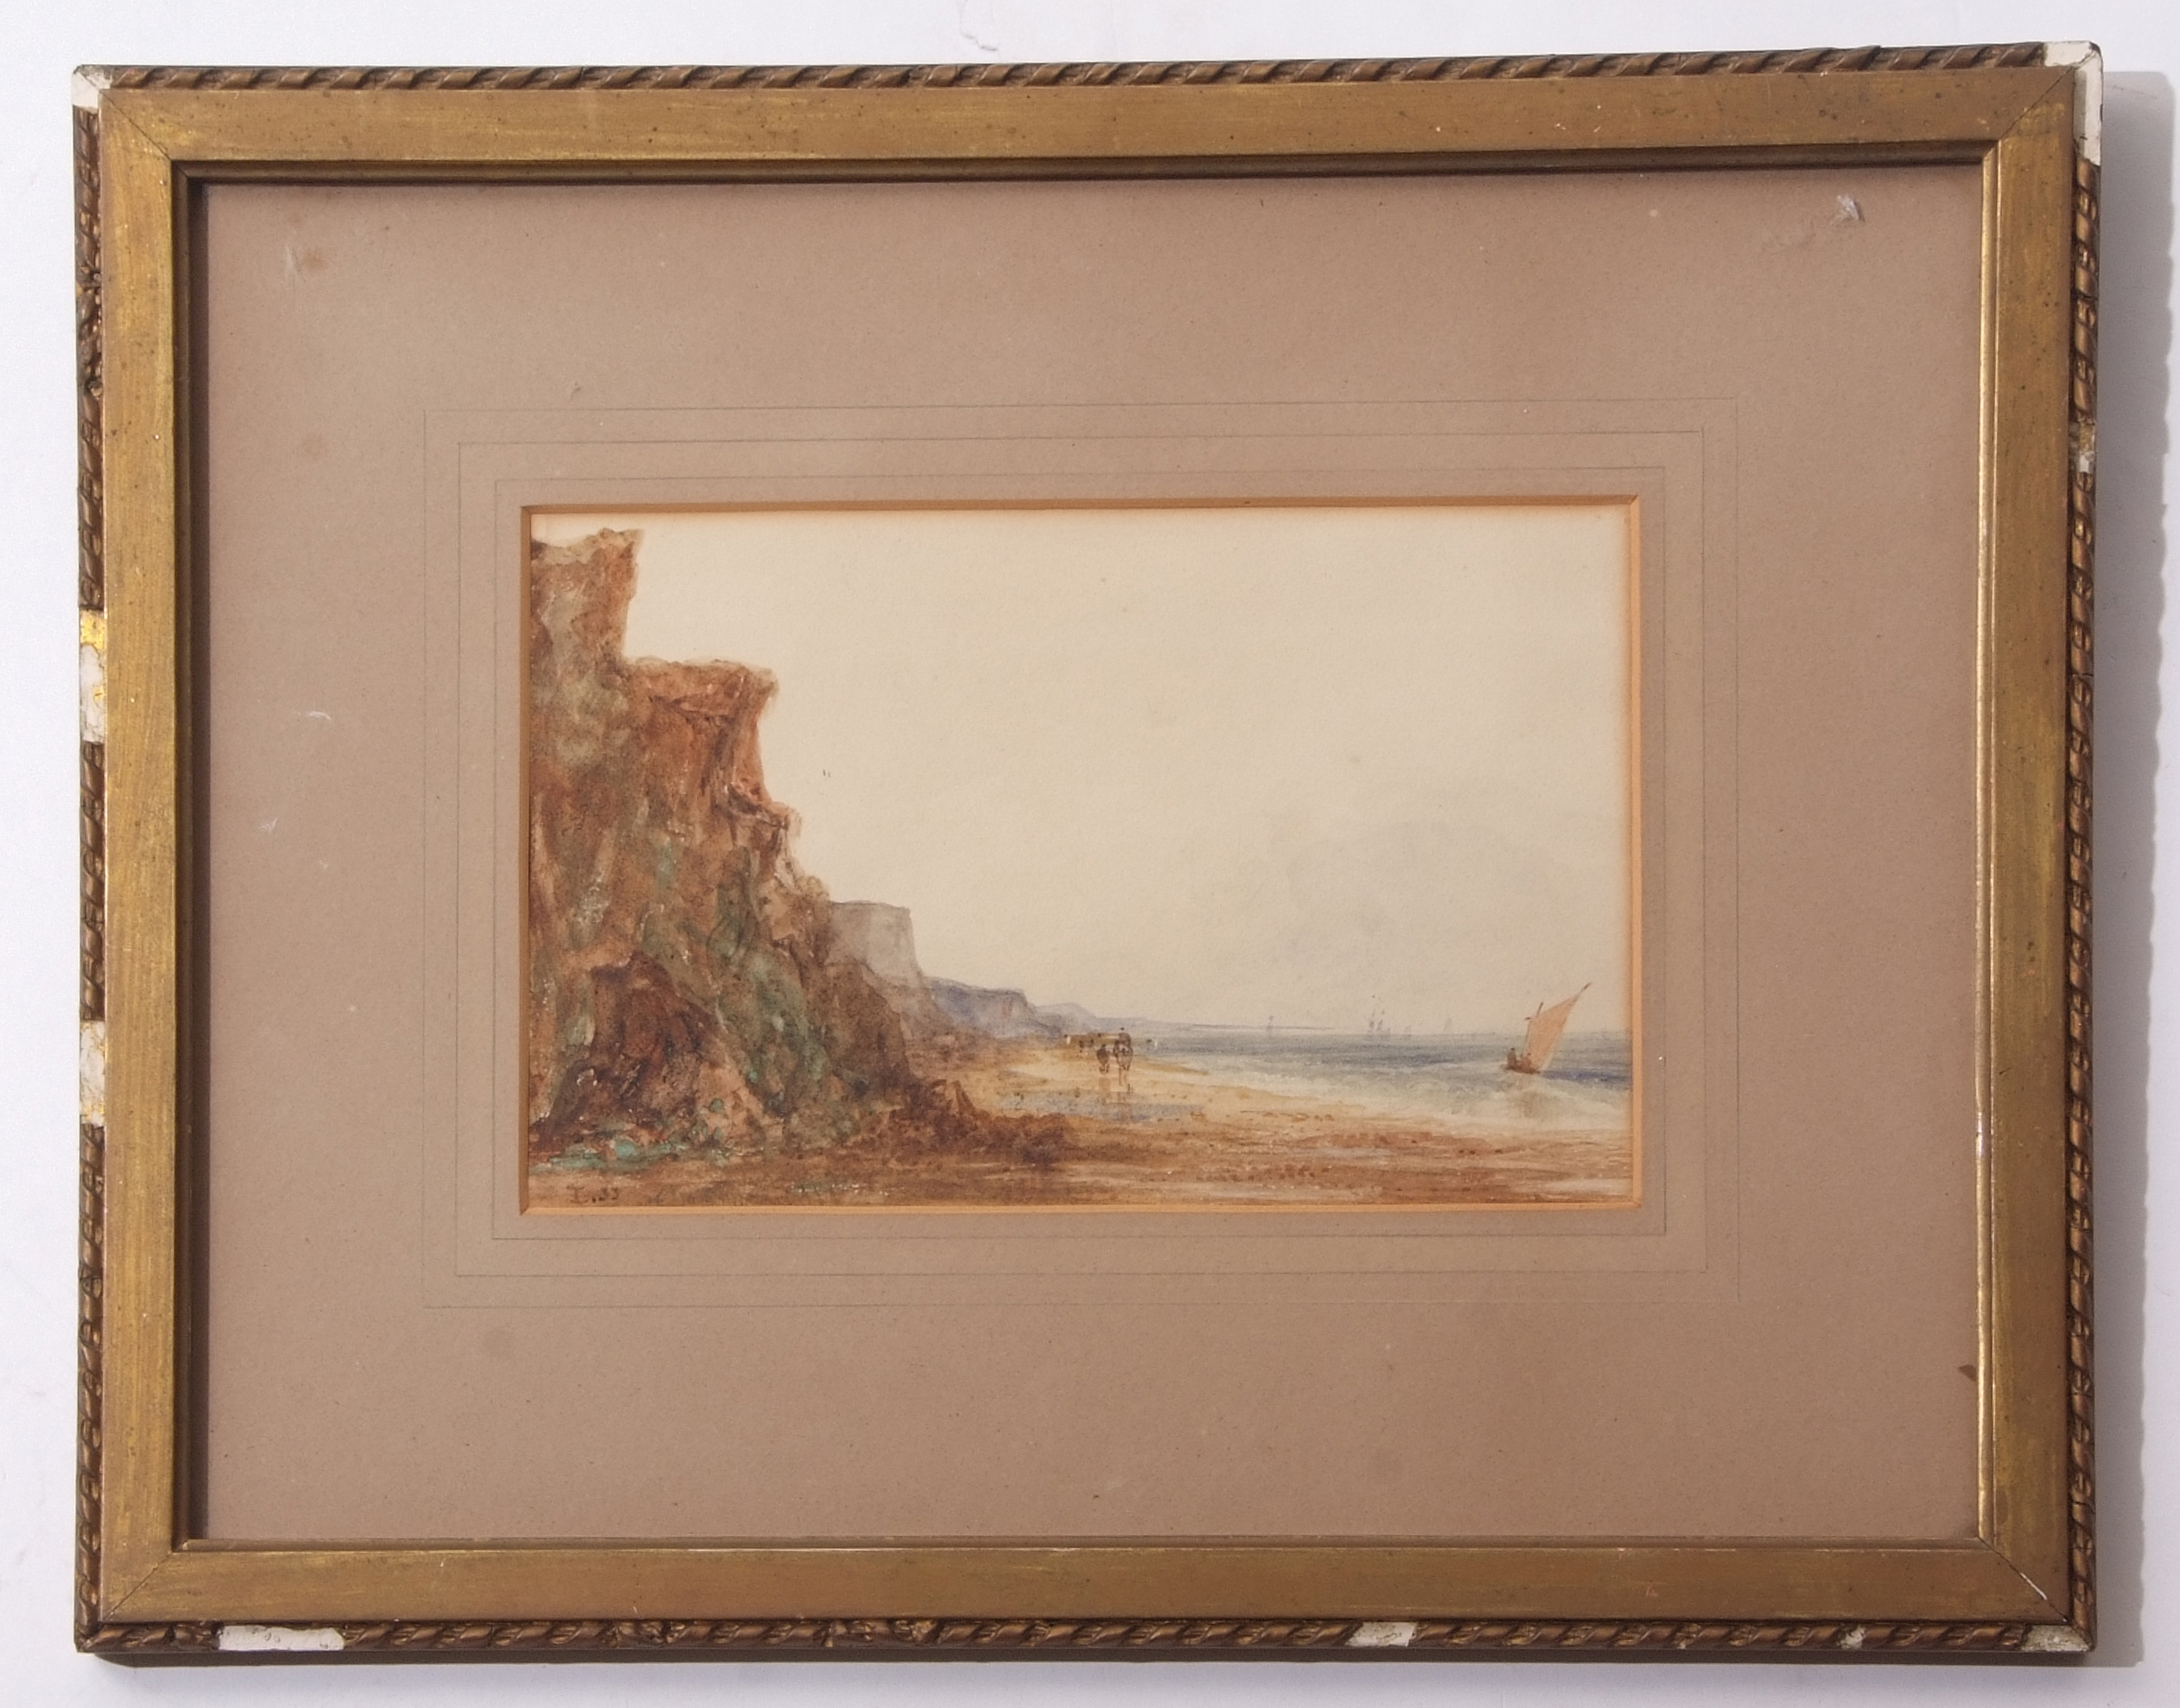 THOMAS LOUND (1801-1861) "Pakefield Beach" watercolour, monogrammed and dated 1833 lower left 14 x - Image 2 of 2